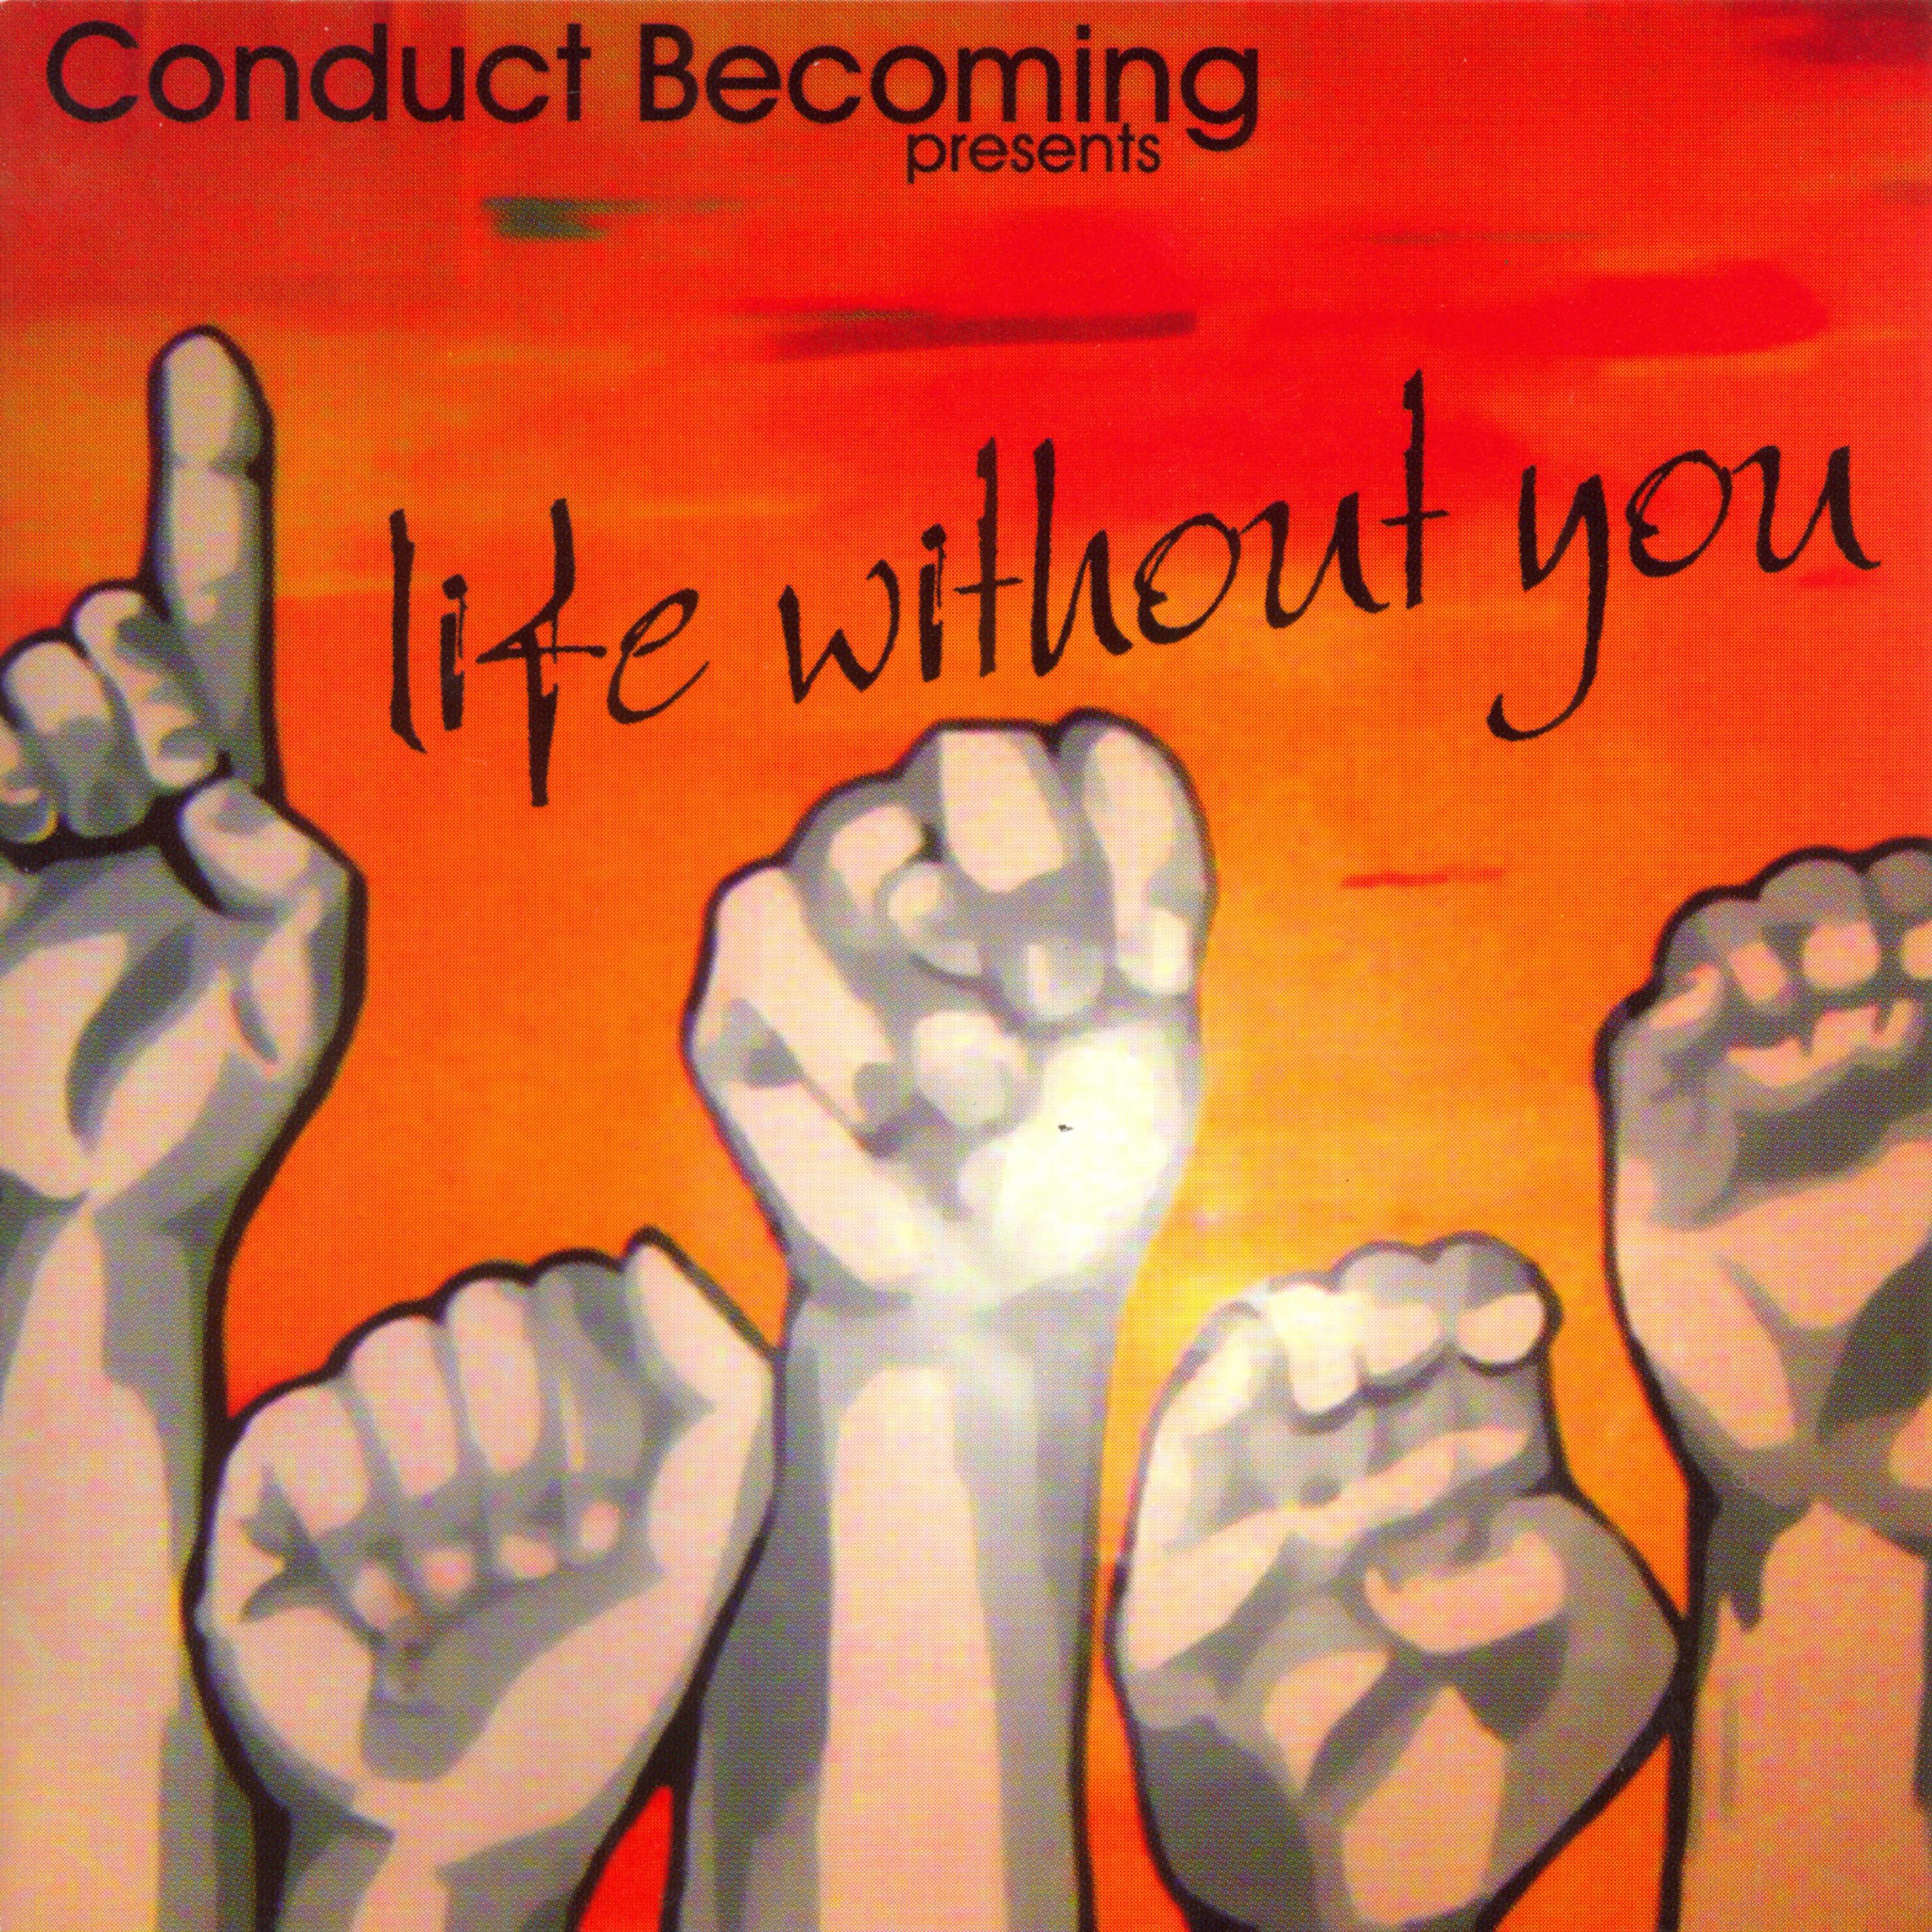 Conduct Becoming 2004: Life Without You